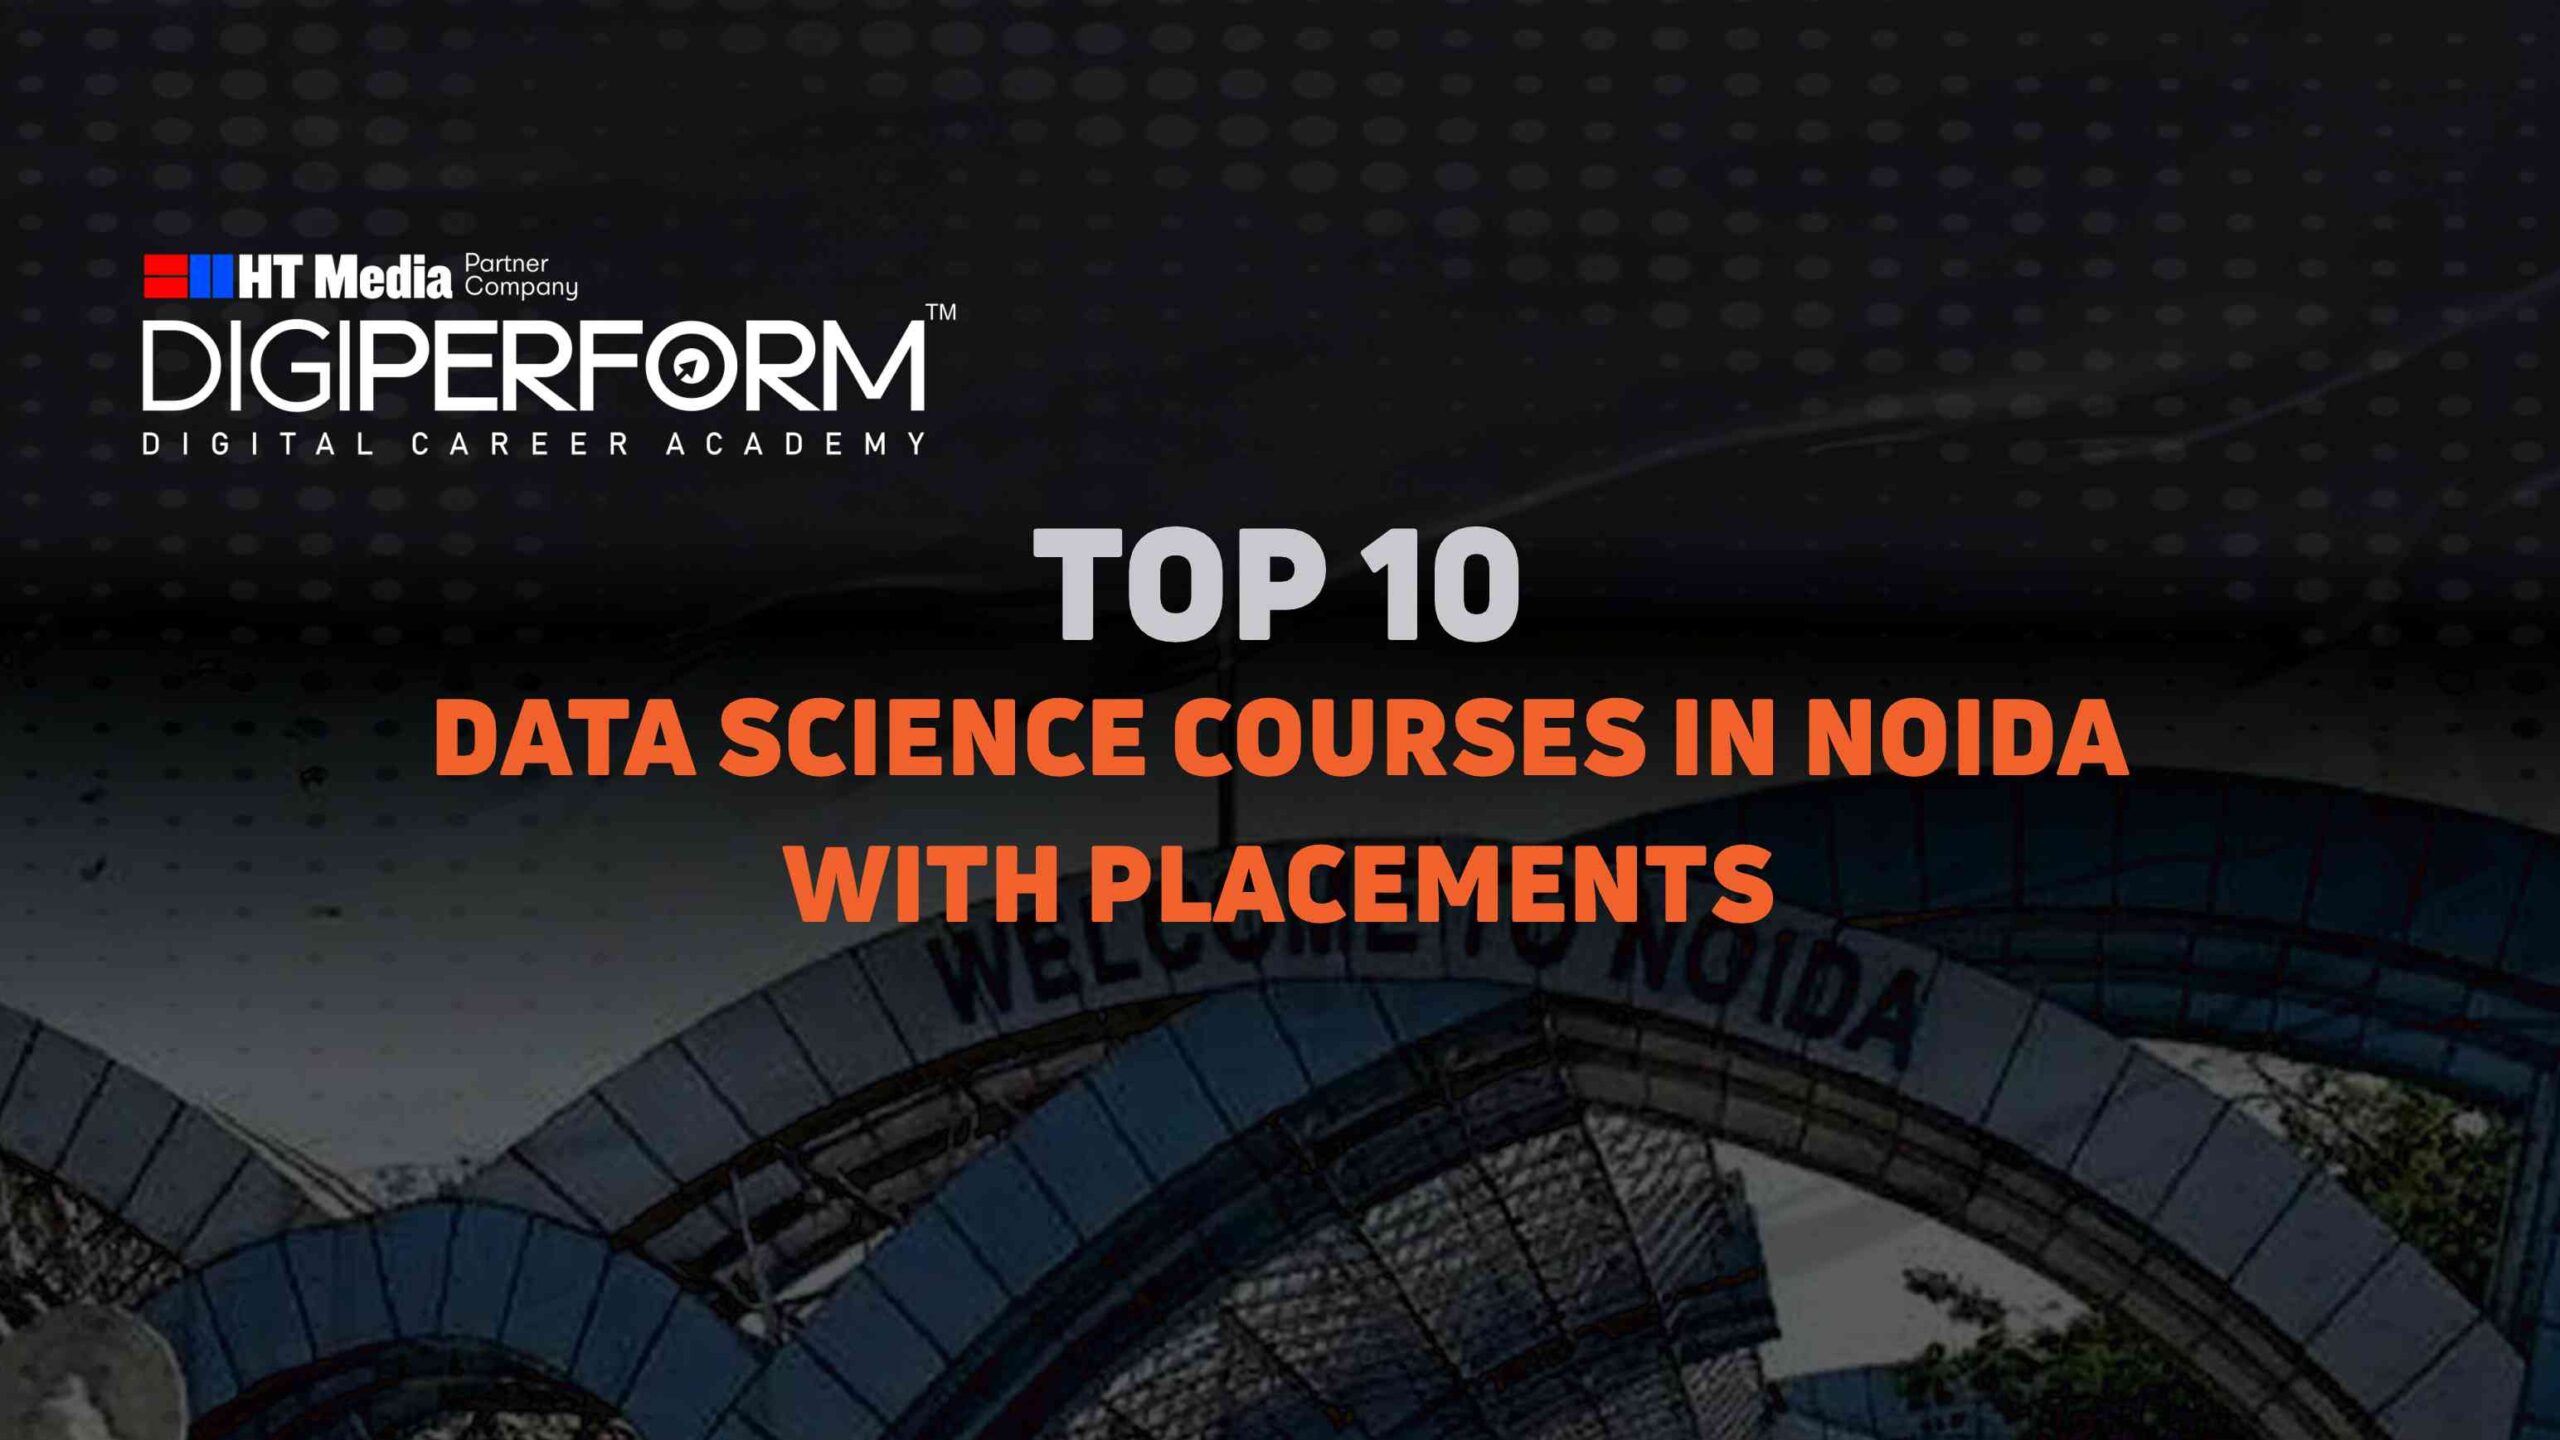 Top 10 Data Science Courses in Noida with Placement